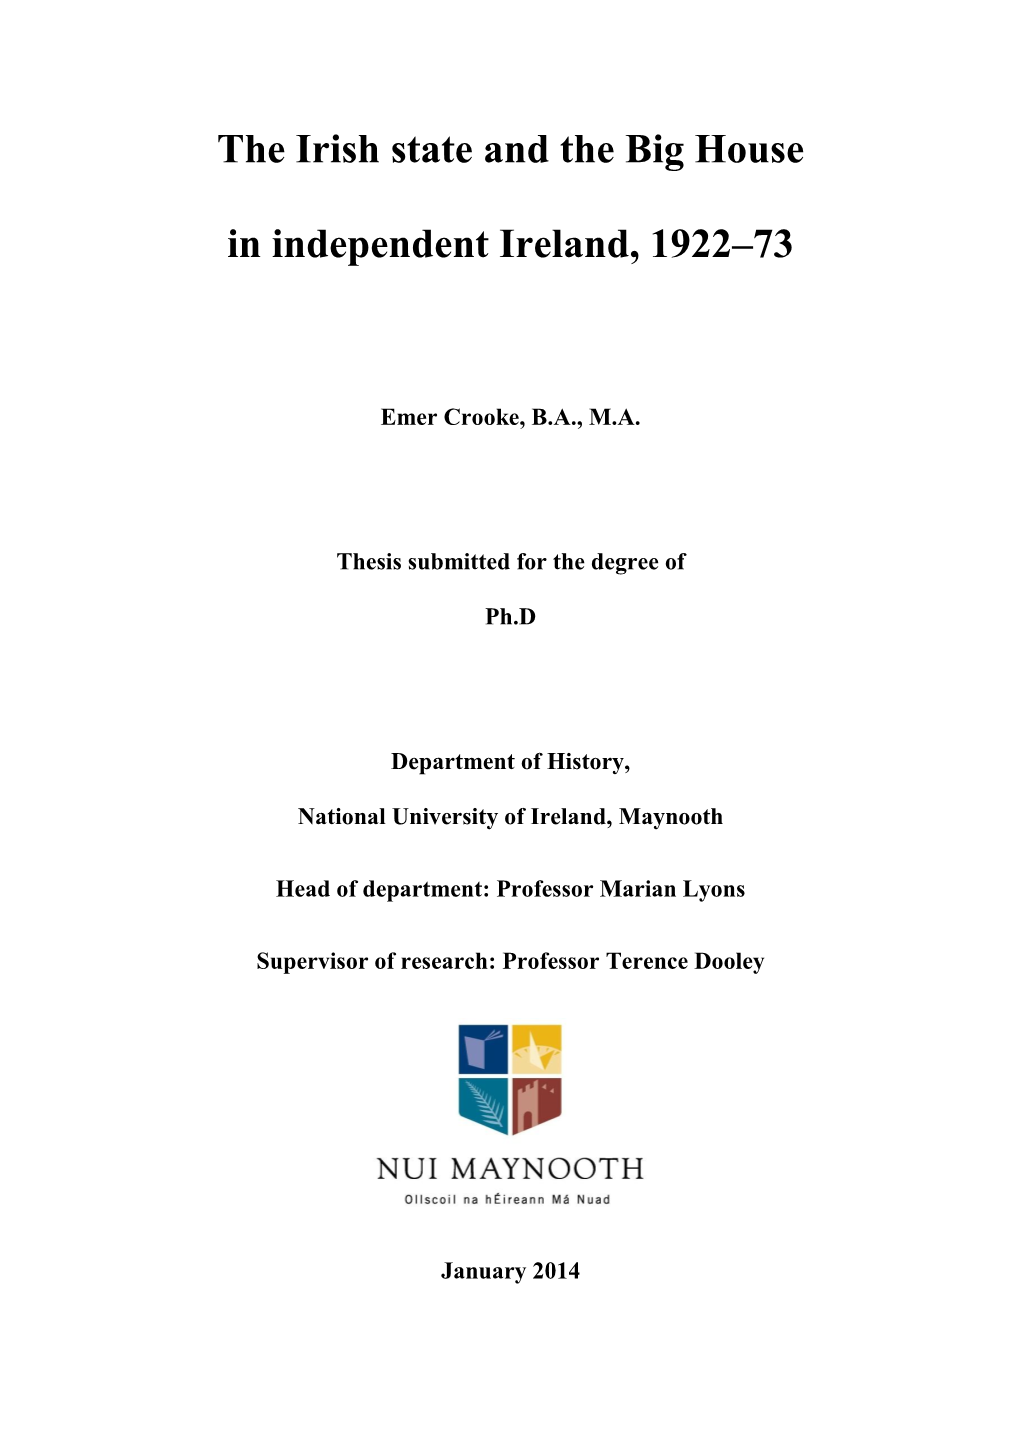 The Irish State and the Big House in Independent Ireland, 1922–73